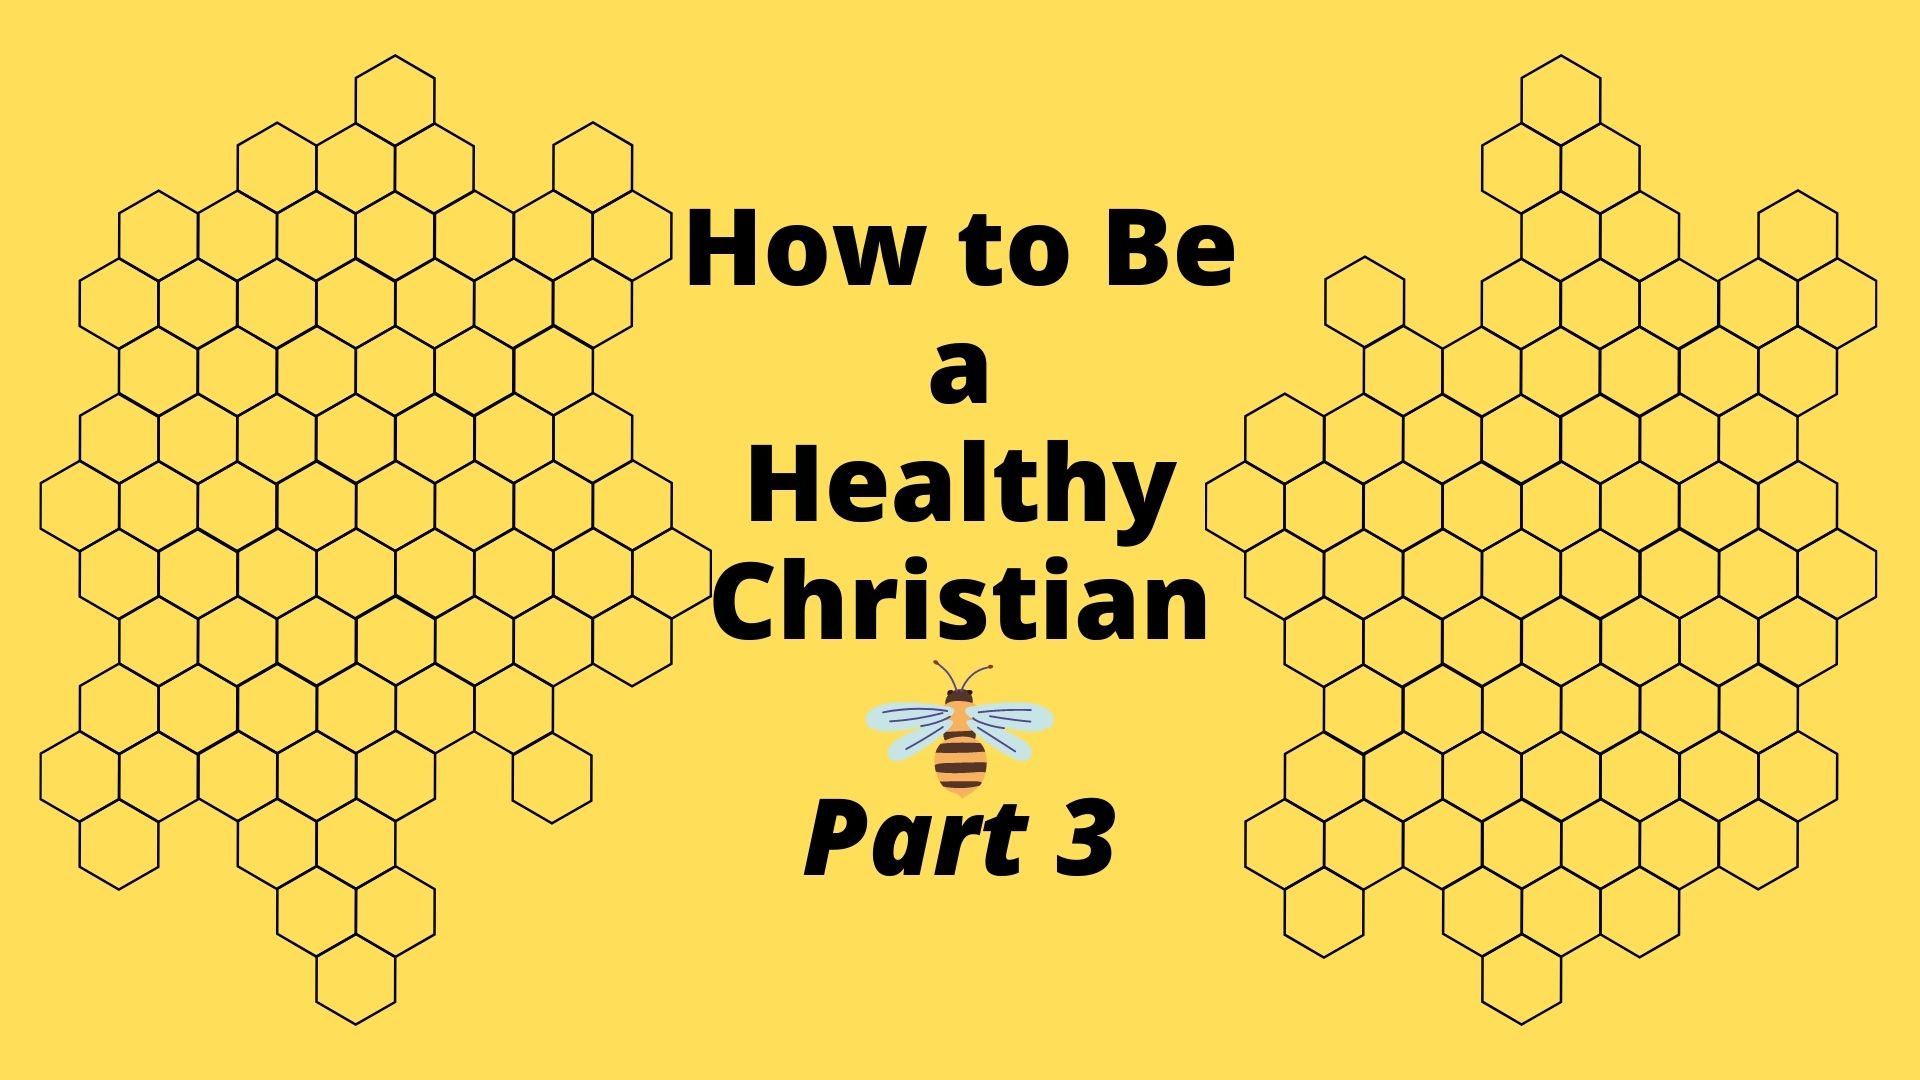 How to Be a Healthy Christian: Part 3 (Ephesians 4:25-32) Image